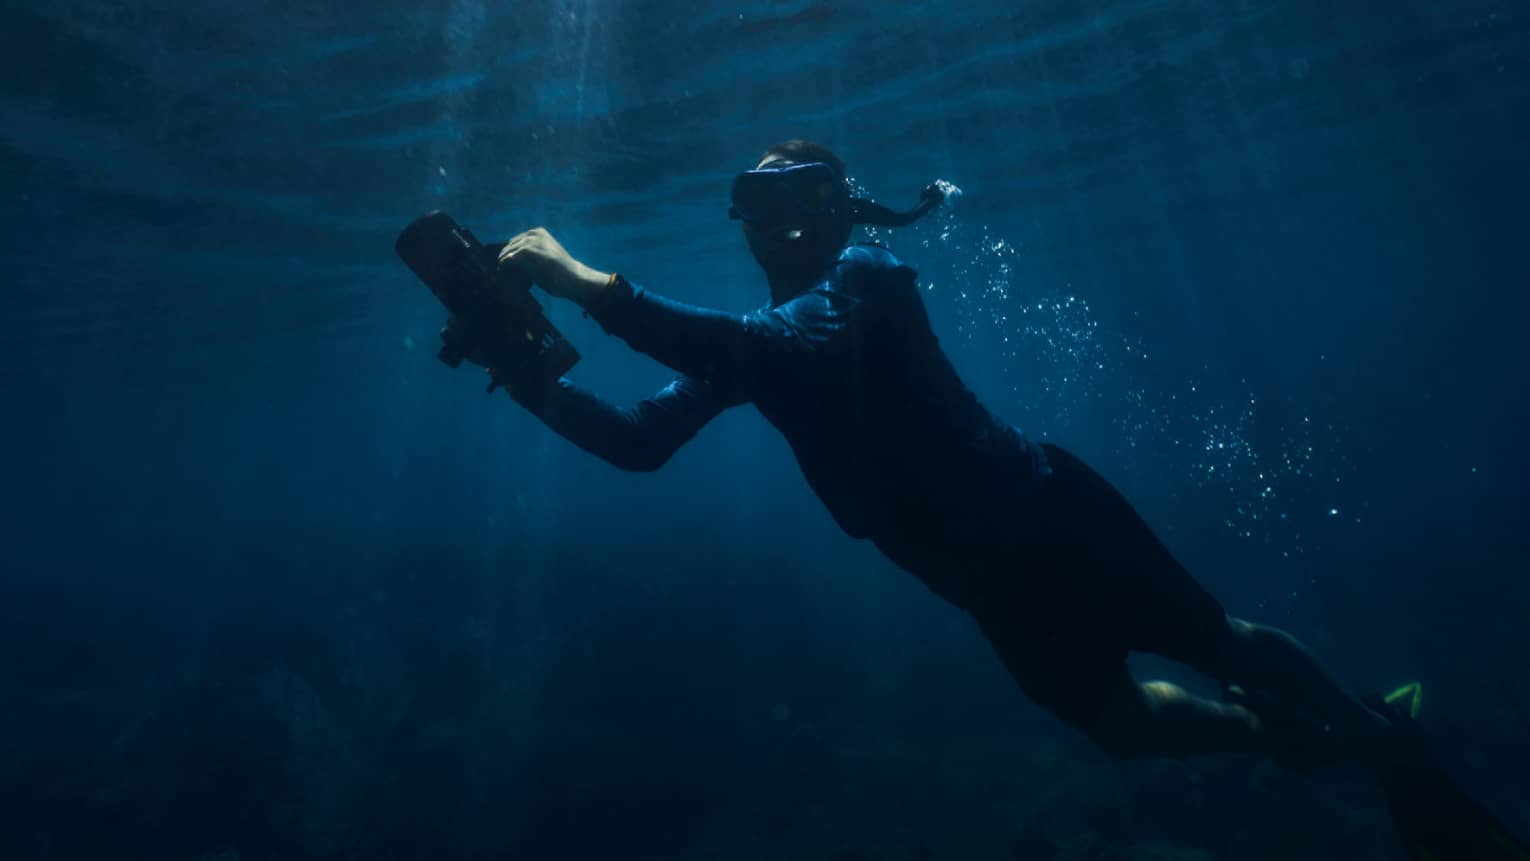 Person holding onto a water scooter underwater